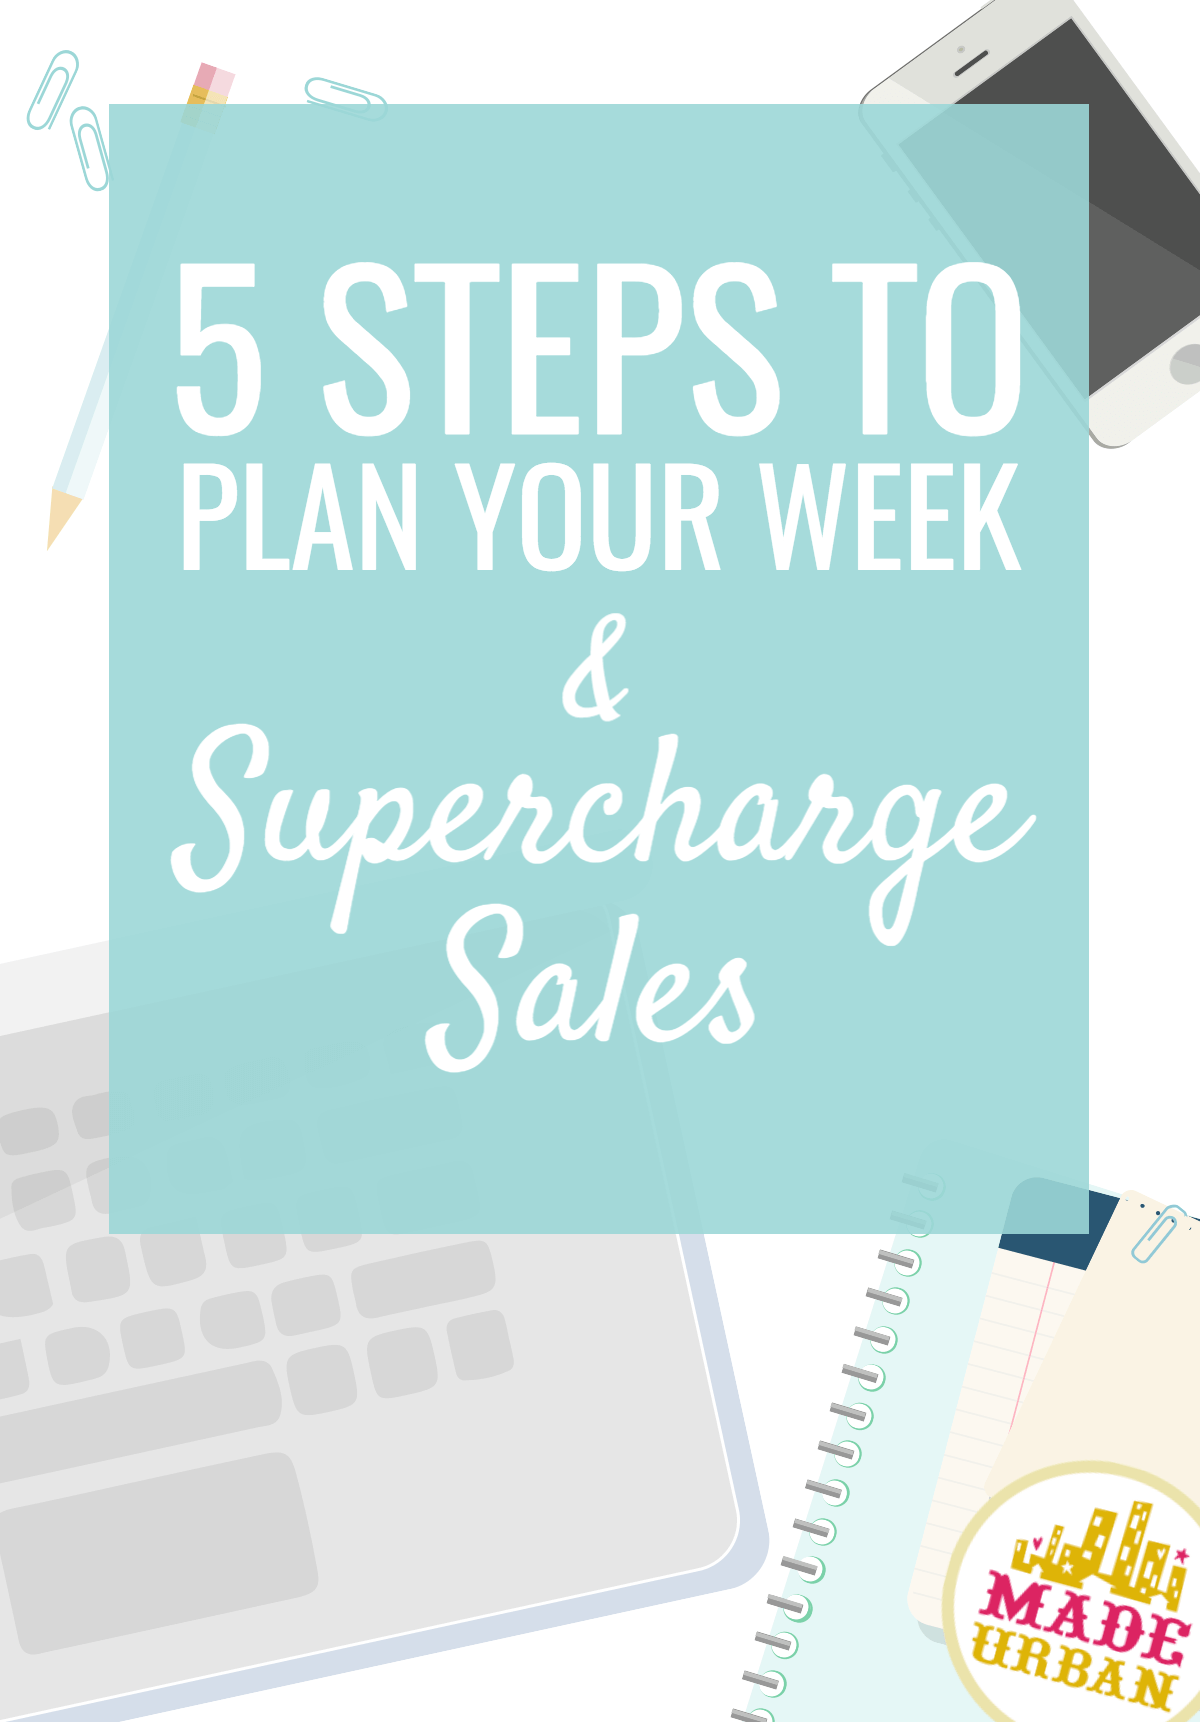 Plan your schedule to drive sales and stop having unproductive days reacting to your handmade business. Follow these 5 steps to finally get organized.